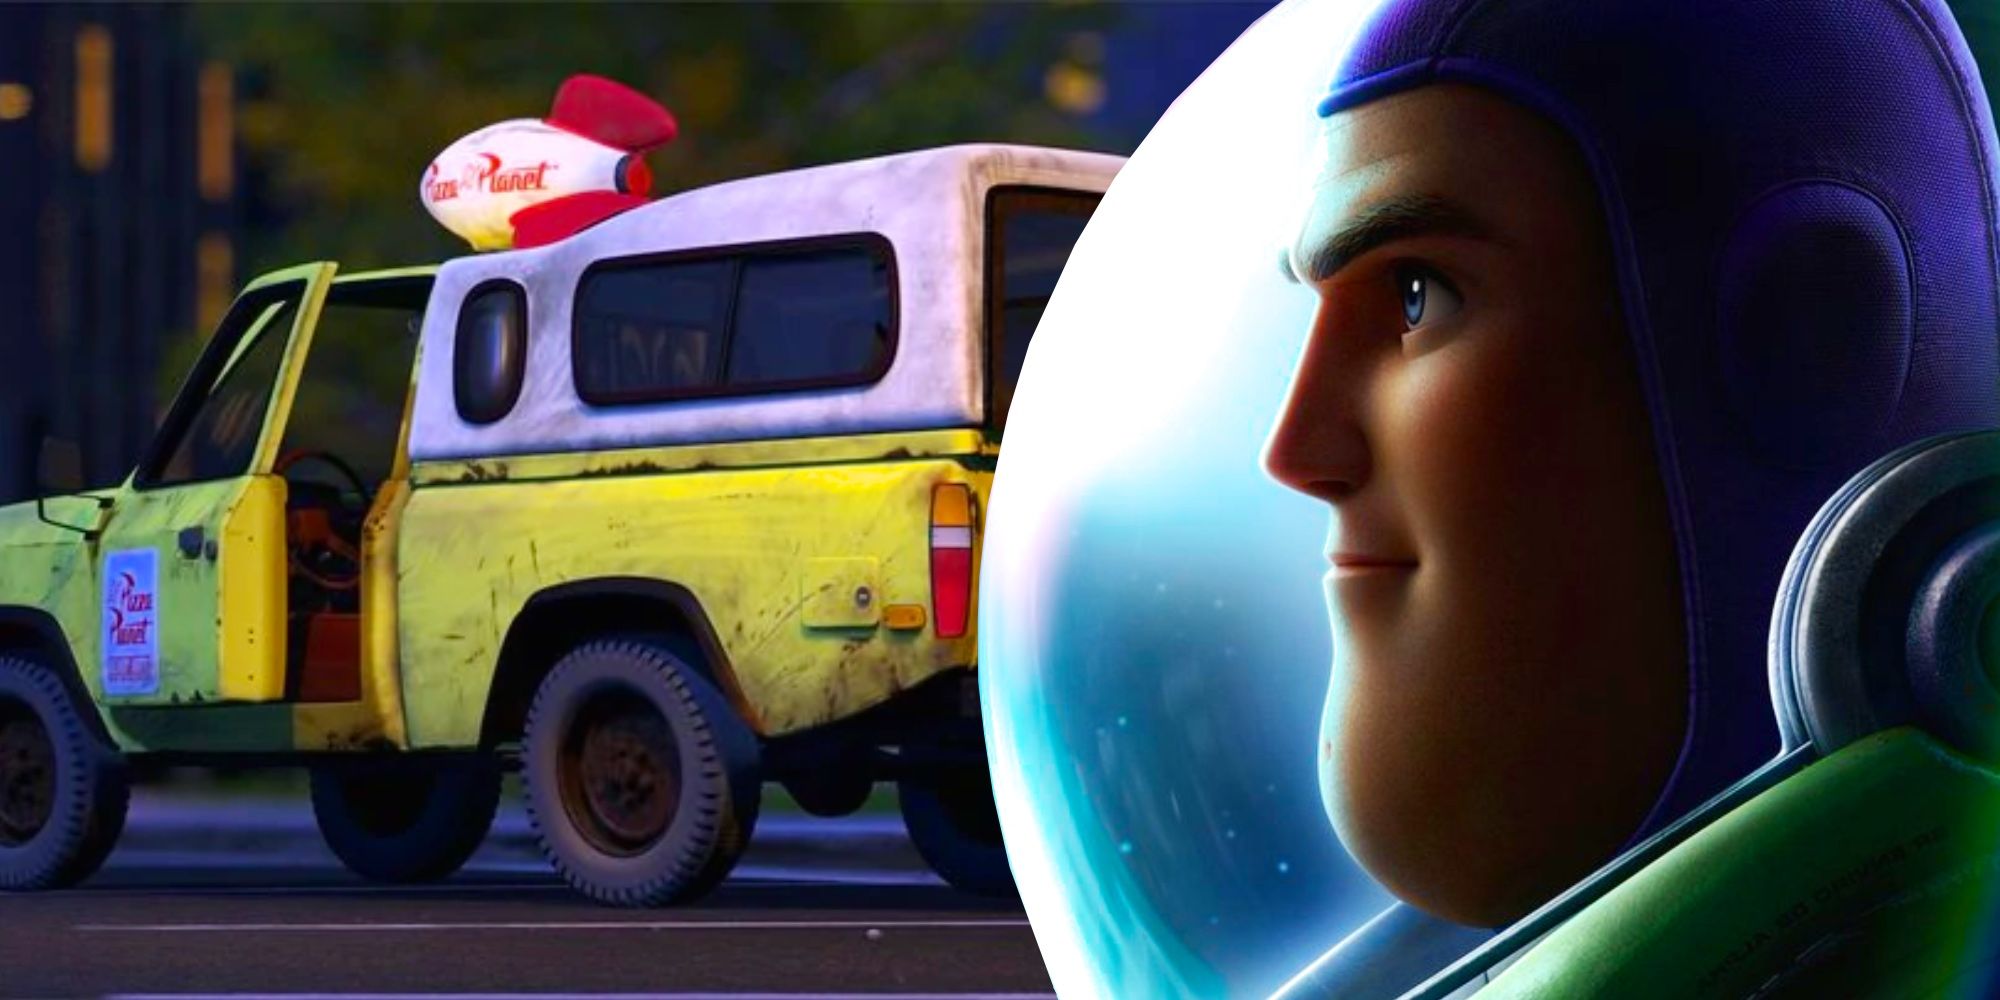 where is the pizza planet truck in lightyear?